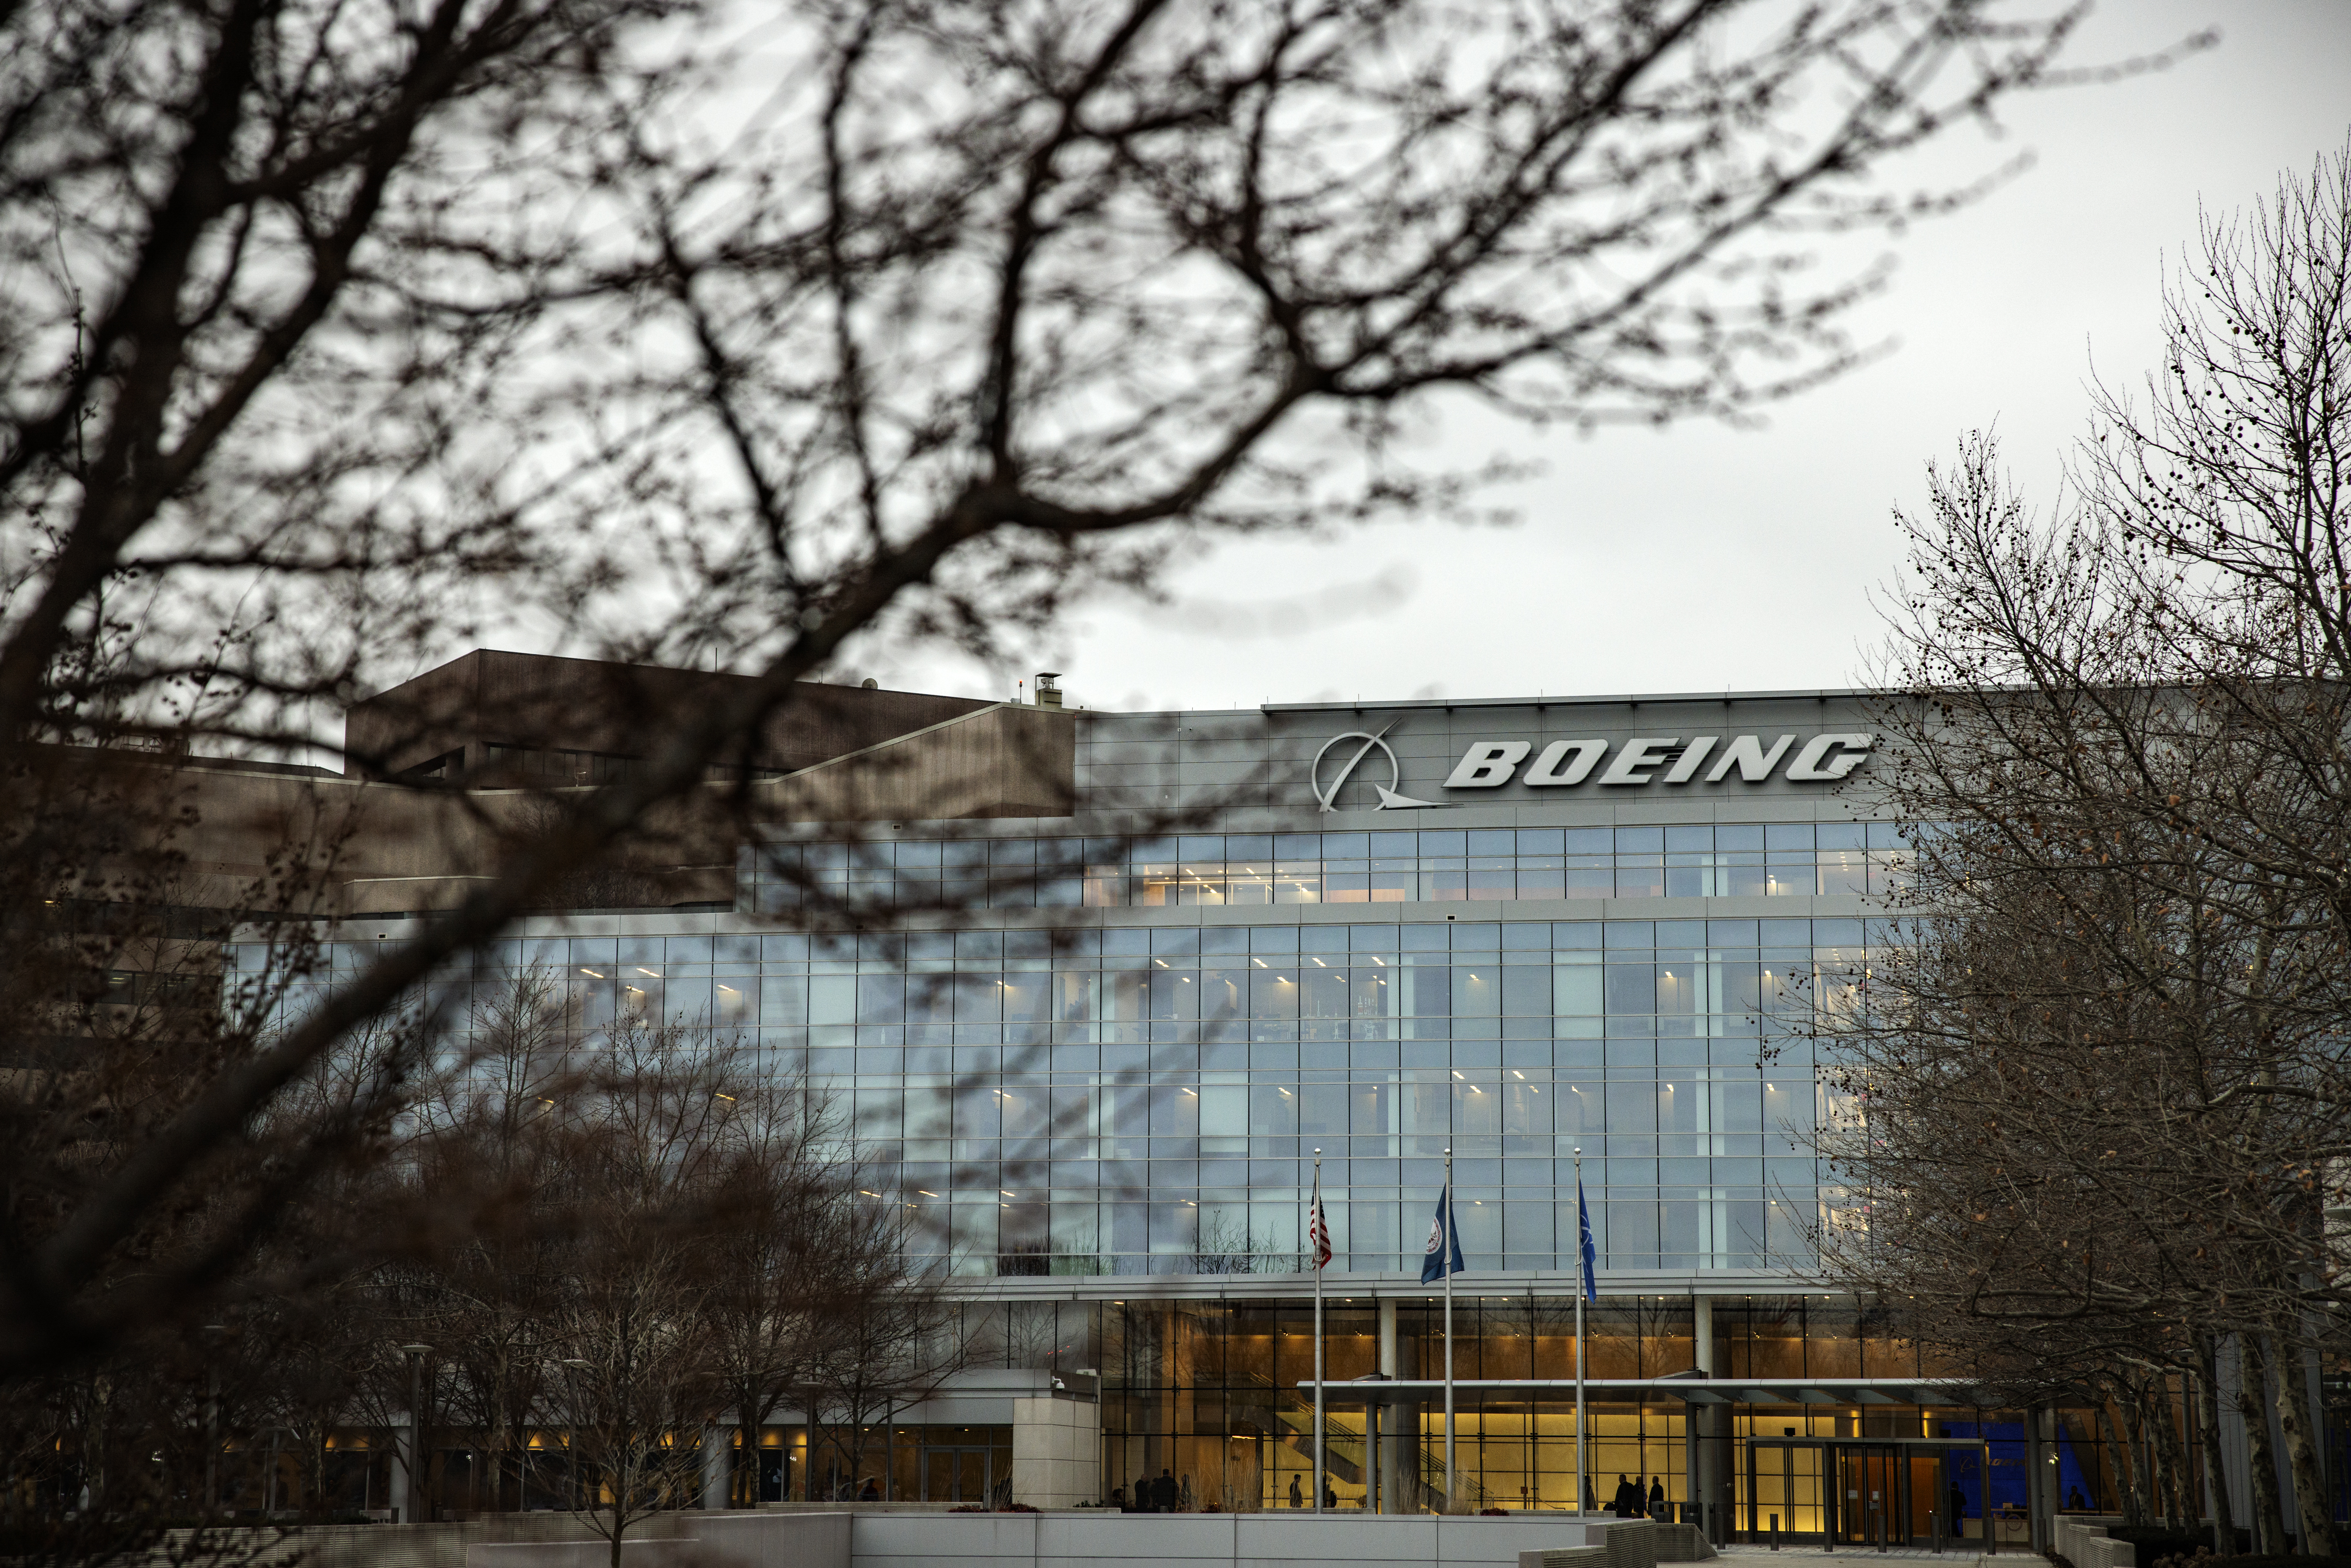 Boeing’s headquarters in Arlington, Virginia, is pictured on January 31.